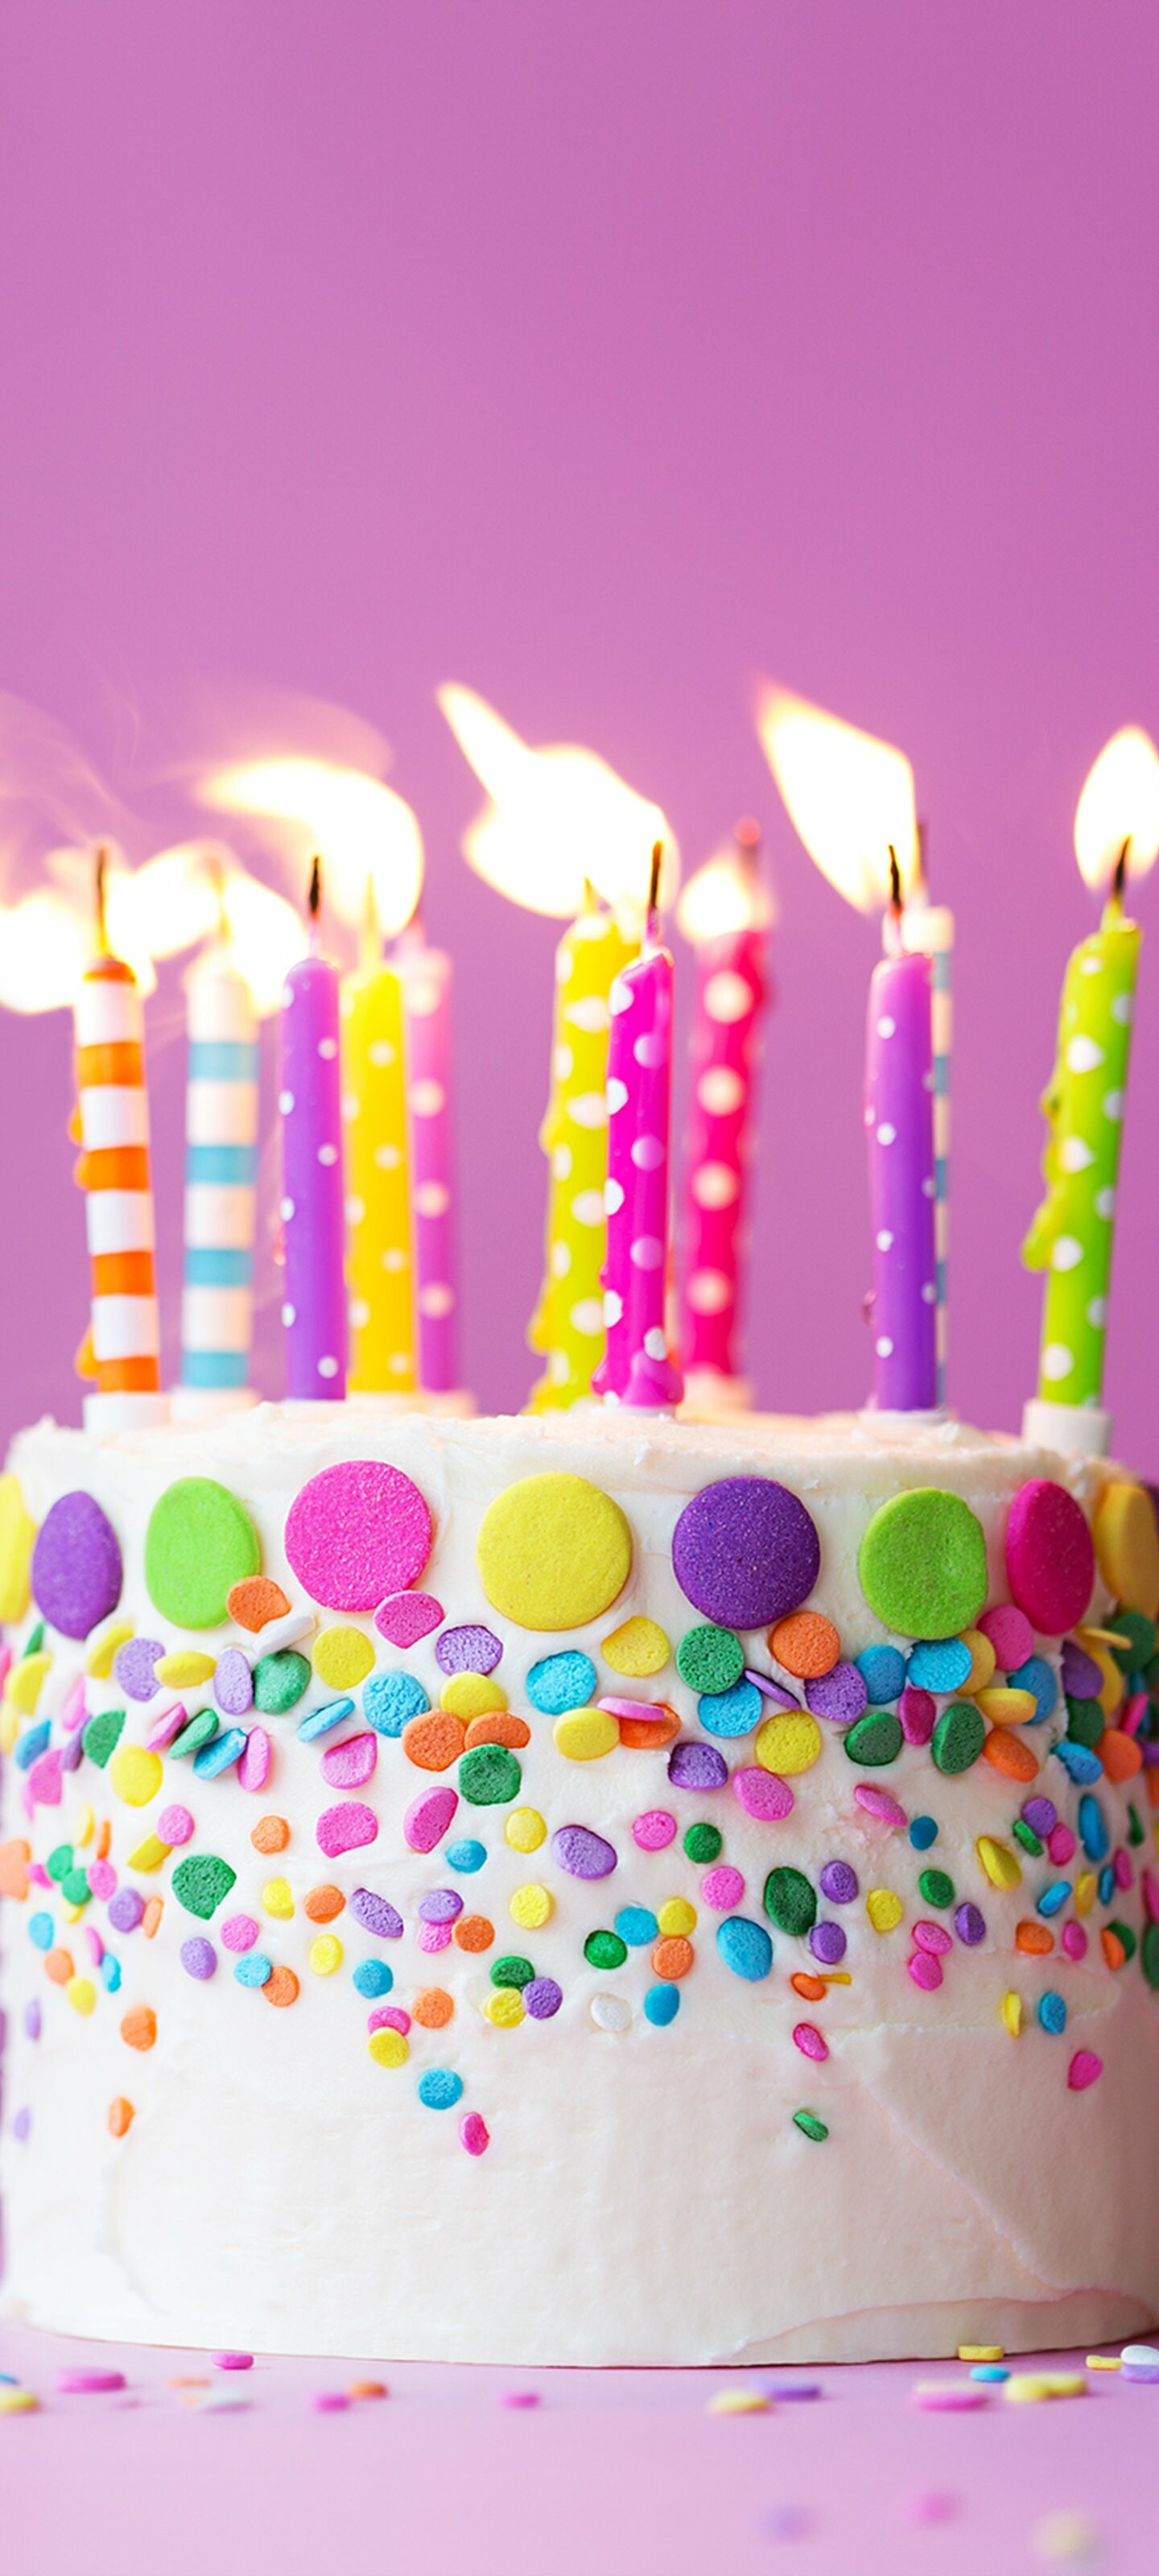 Birthday Party: Holiday, Cake, Candles, Special day. 1440x3200 HD Background.